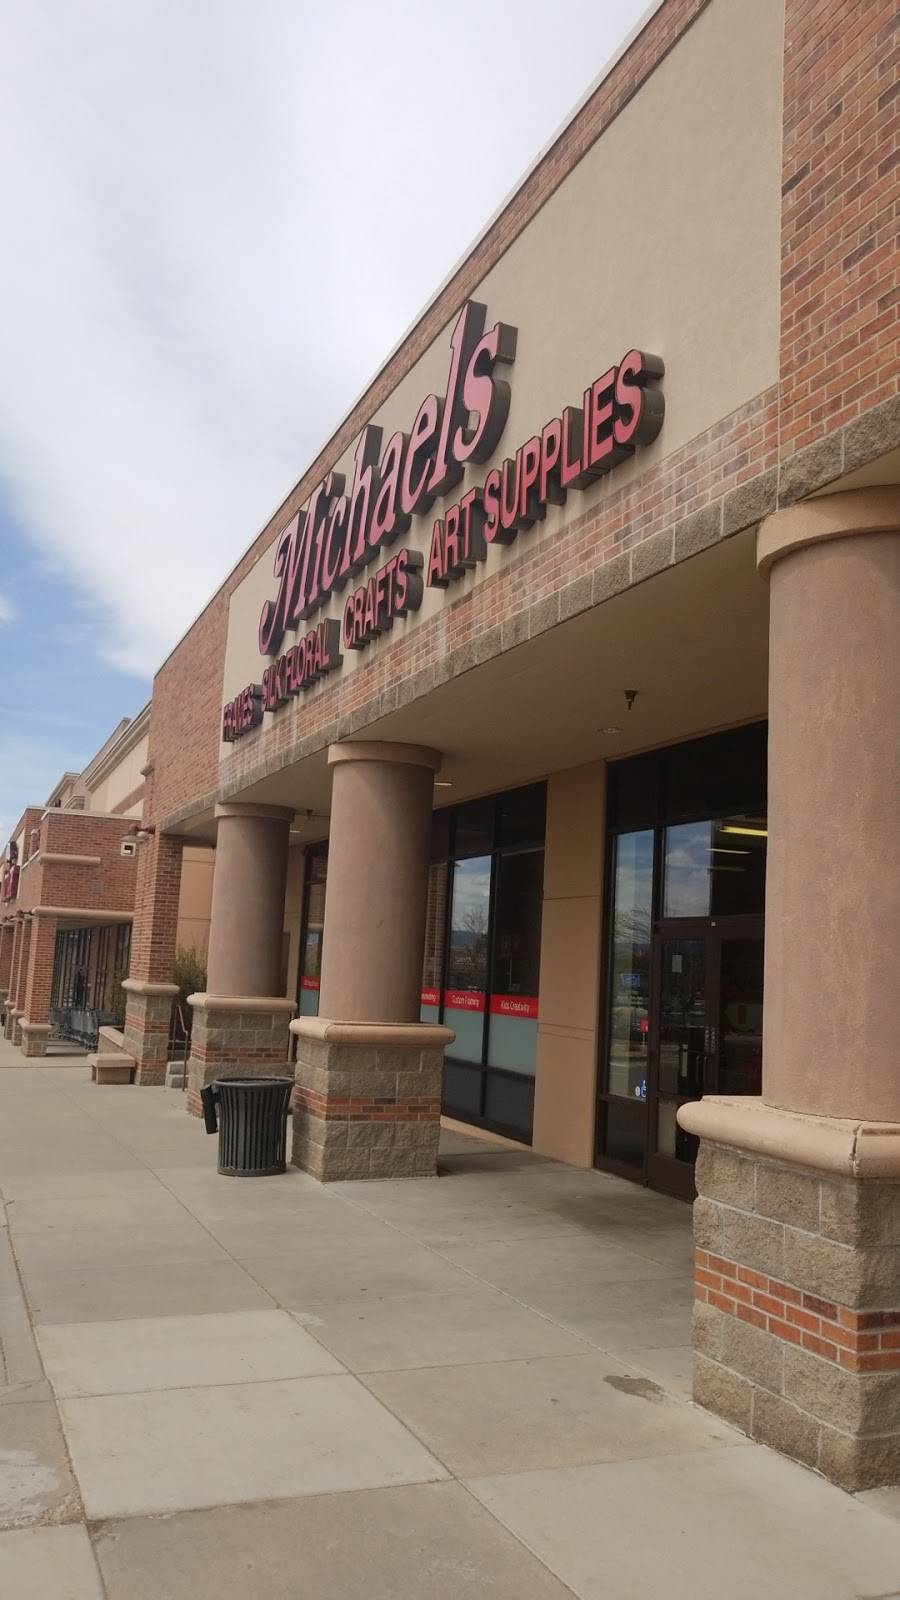 Michaels | 9565 E County Line Rd, Englewood, CO 80112, USA | Phone: (303) 708-1411